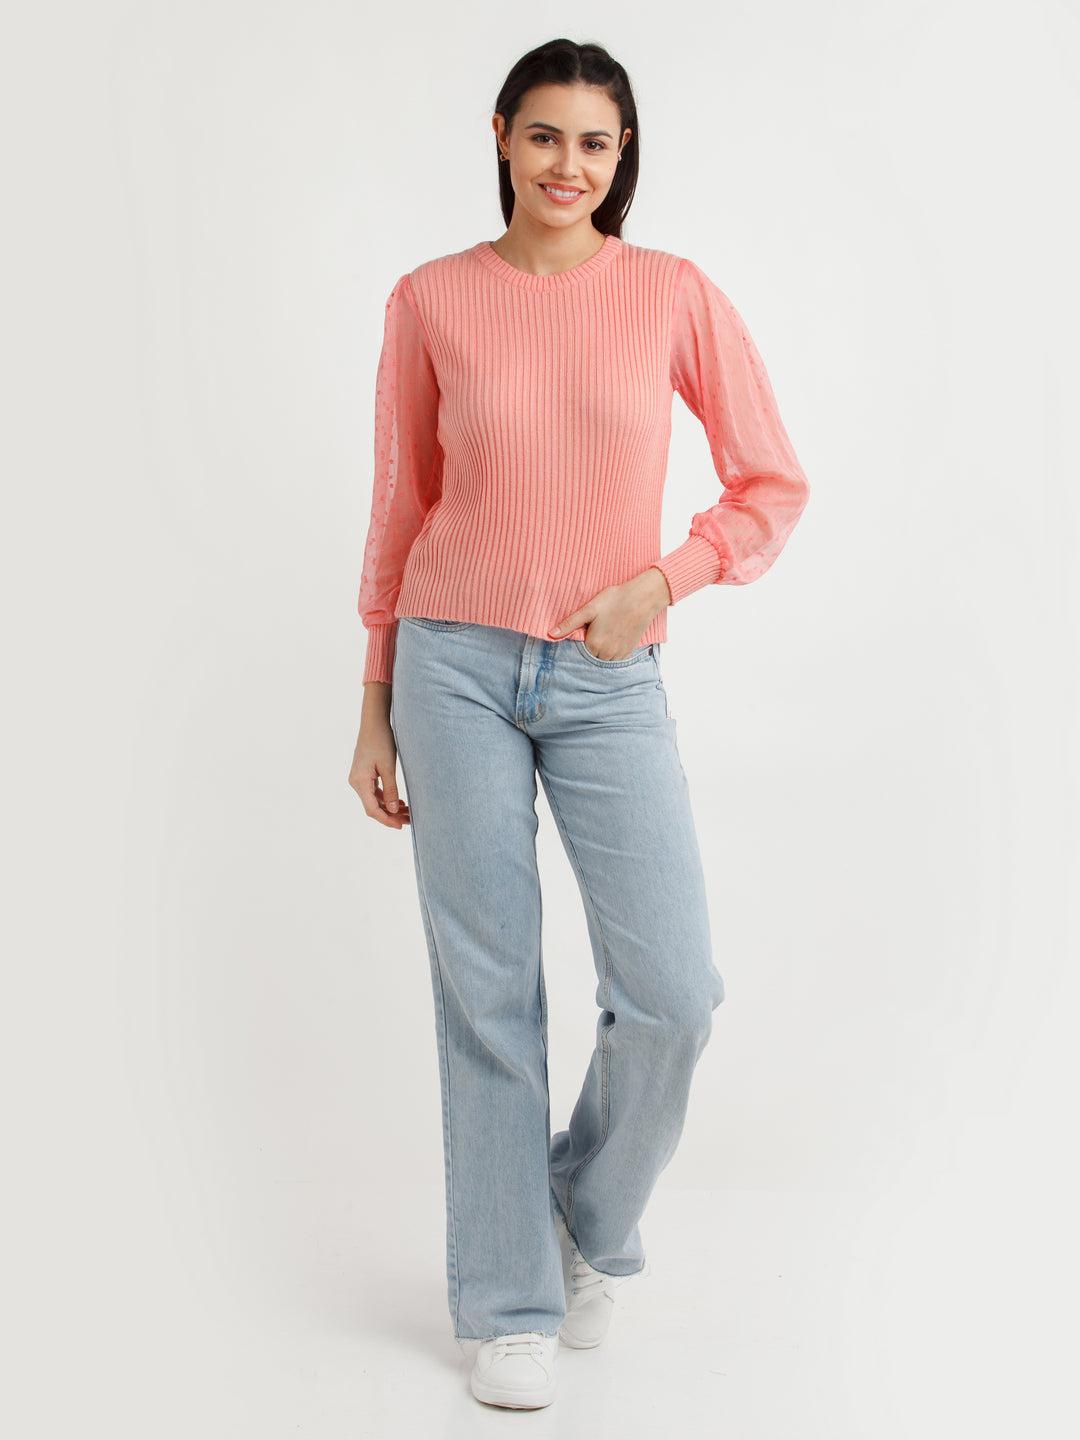 coral-solid-sweater-for-women